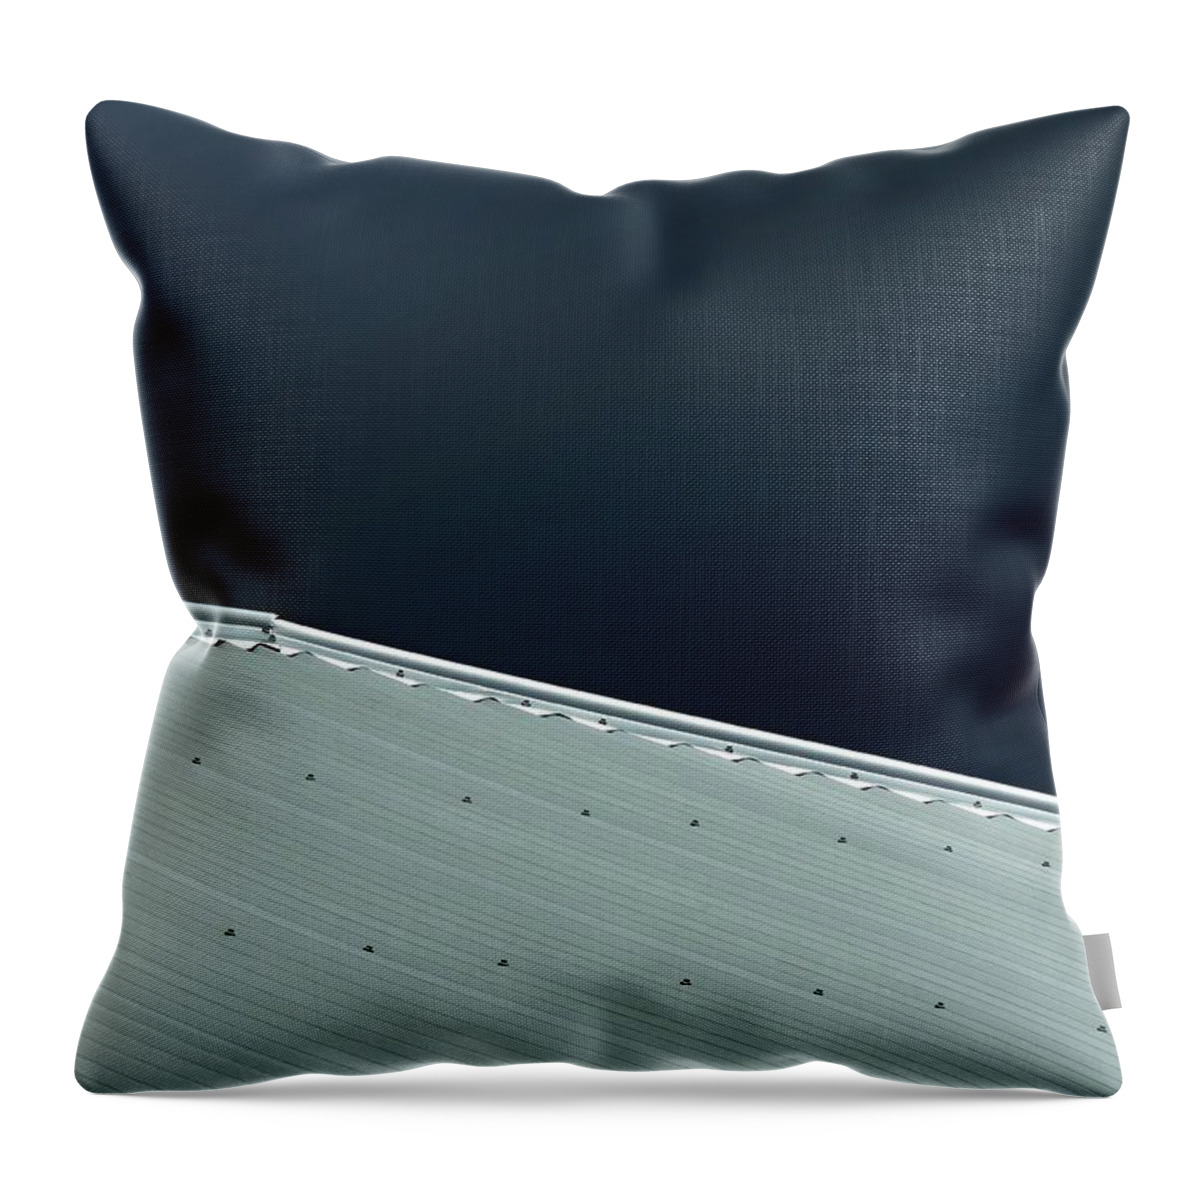 Minimalist Throw Pillow featuring the photograph Black Sky by Denise Clark